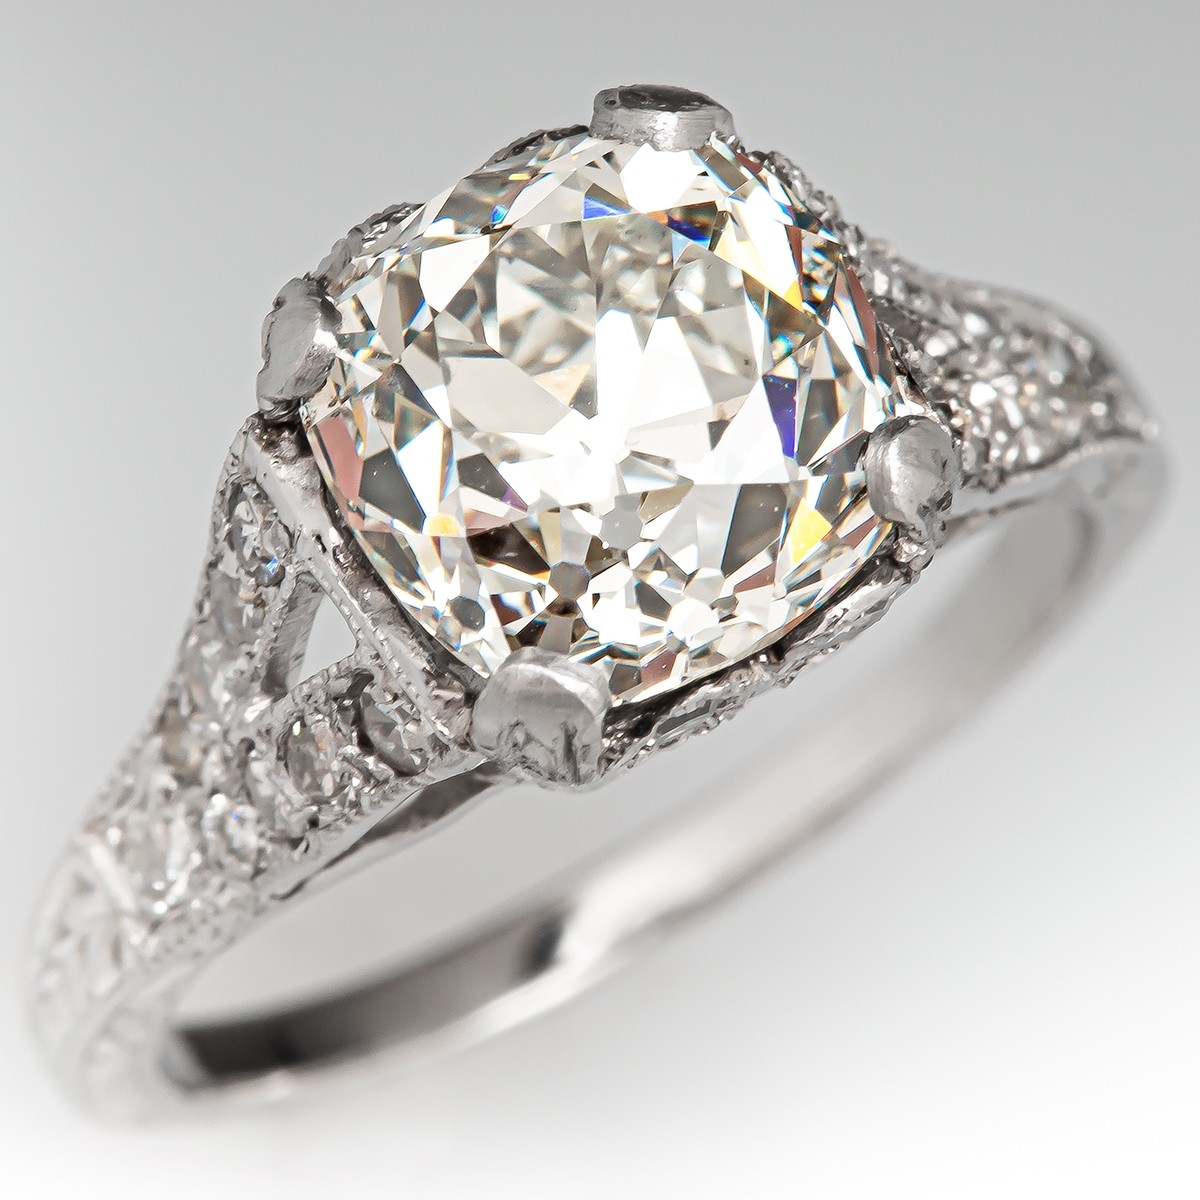 3.31ct Old Mine Cut Diamond Engagement Ring | Antique cut engagement rings, Engagement  rings, Engagement ring cuts